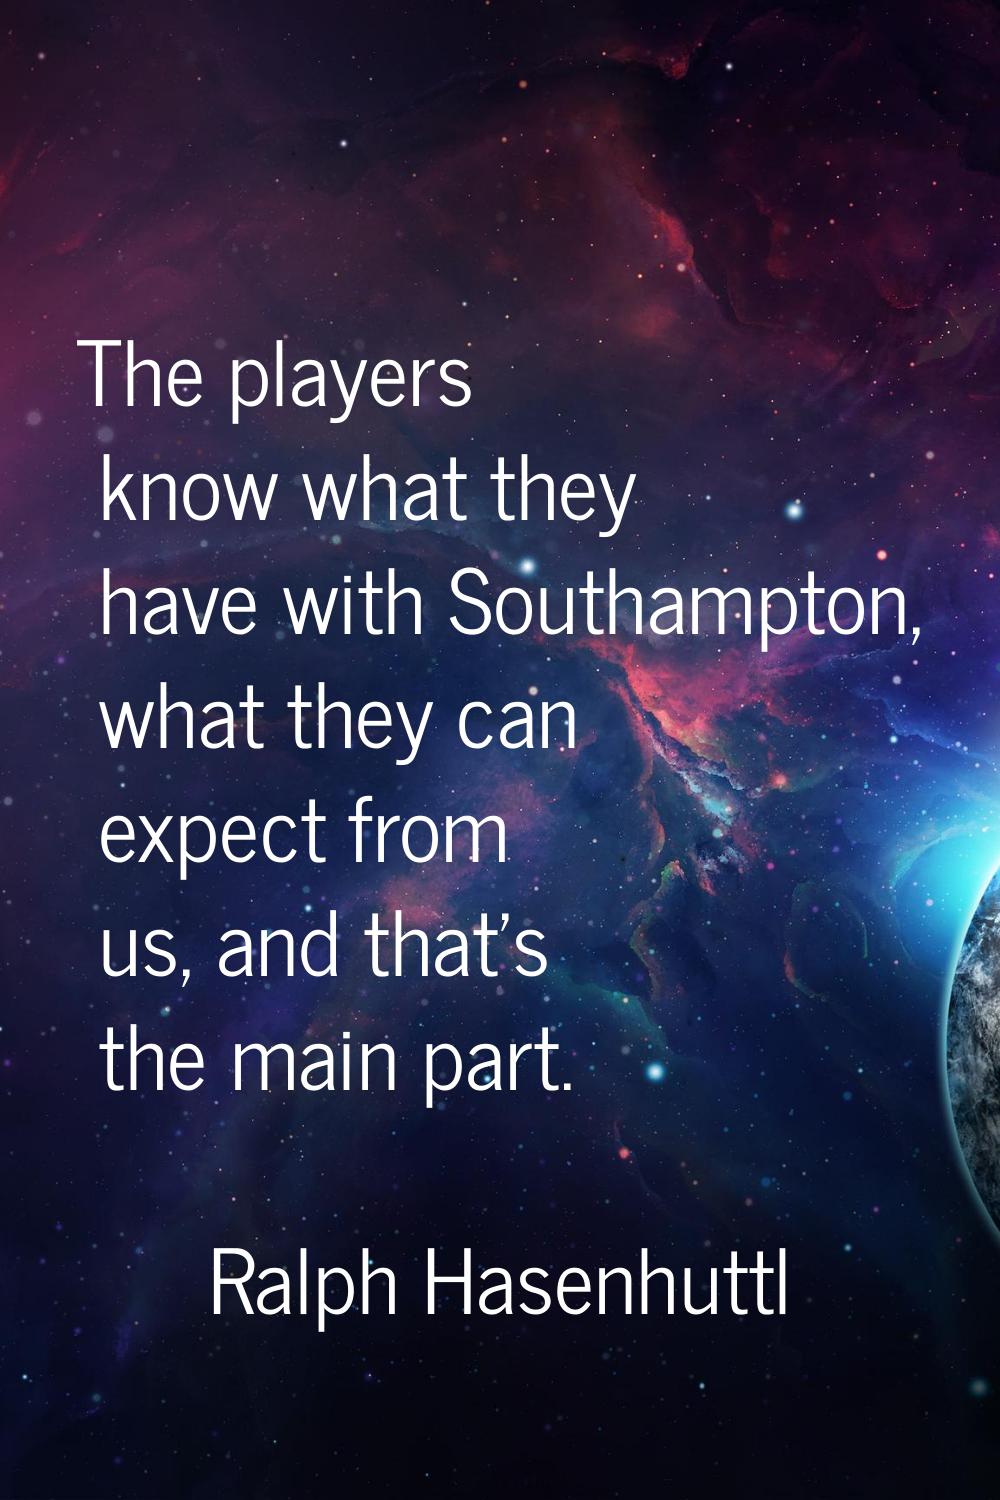 The players know what they have with Southampton, what they can expect from us, and that's the main